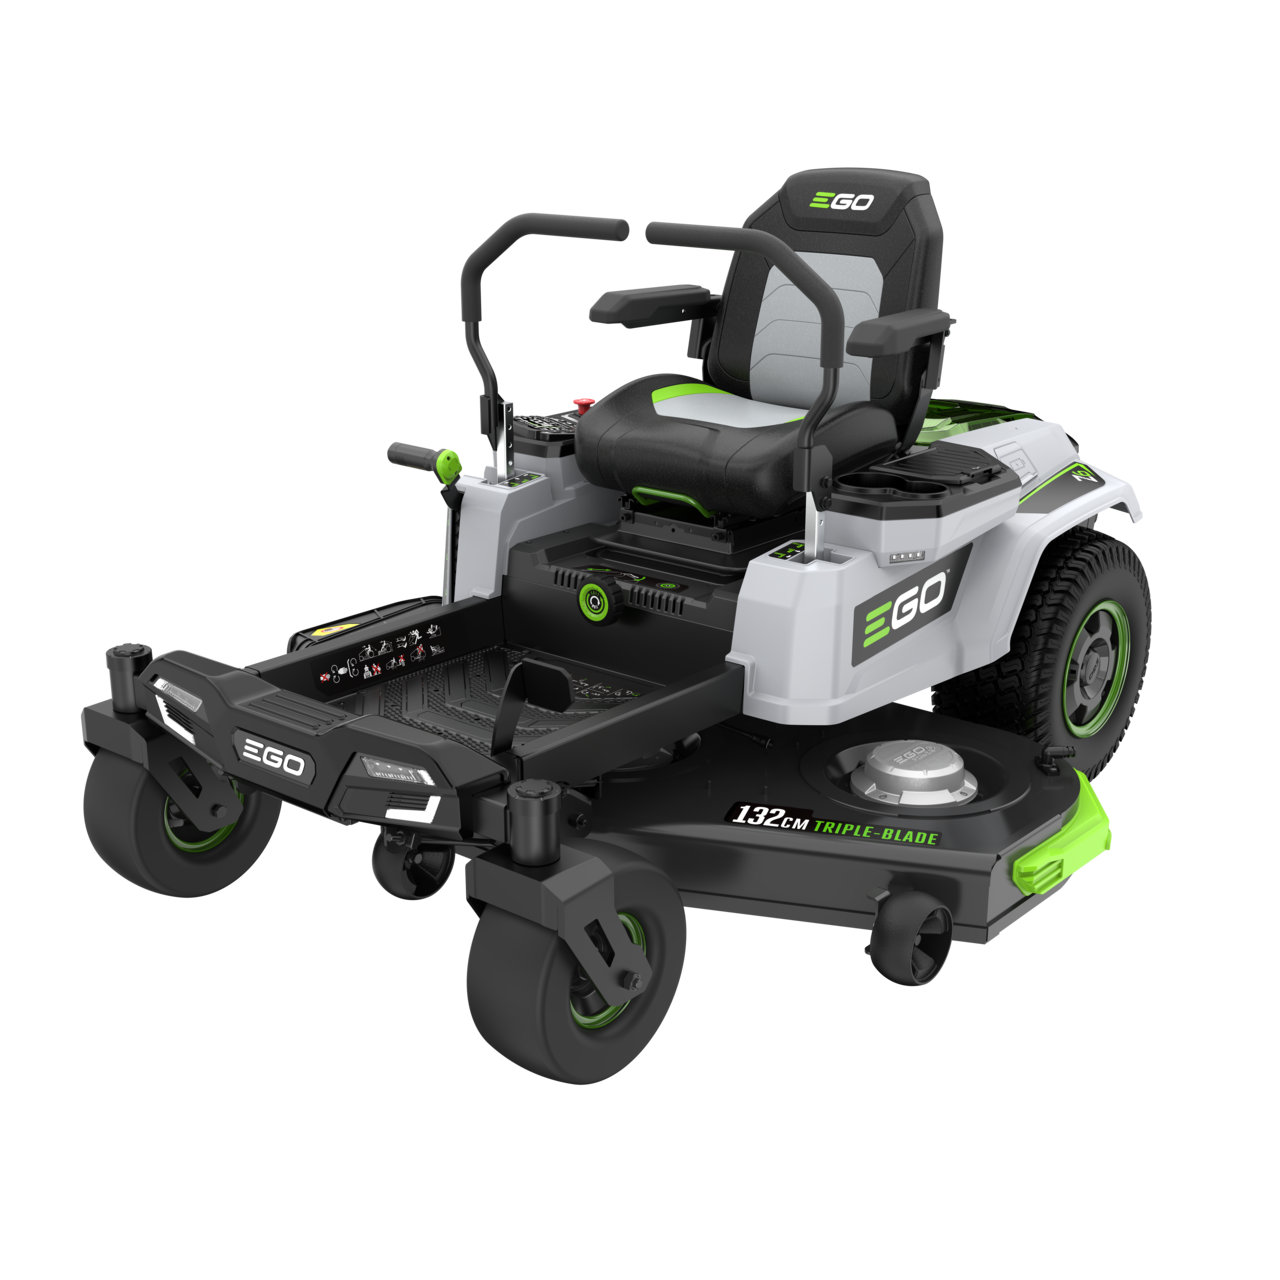 Ego ZT5201E-L Z6 Zero-Turn Ride on Mower (With Charger)